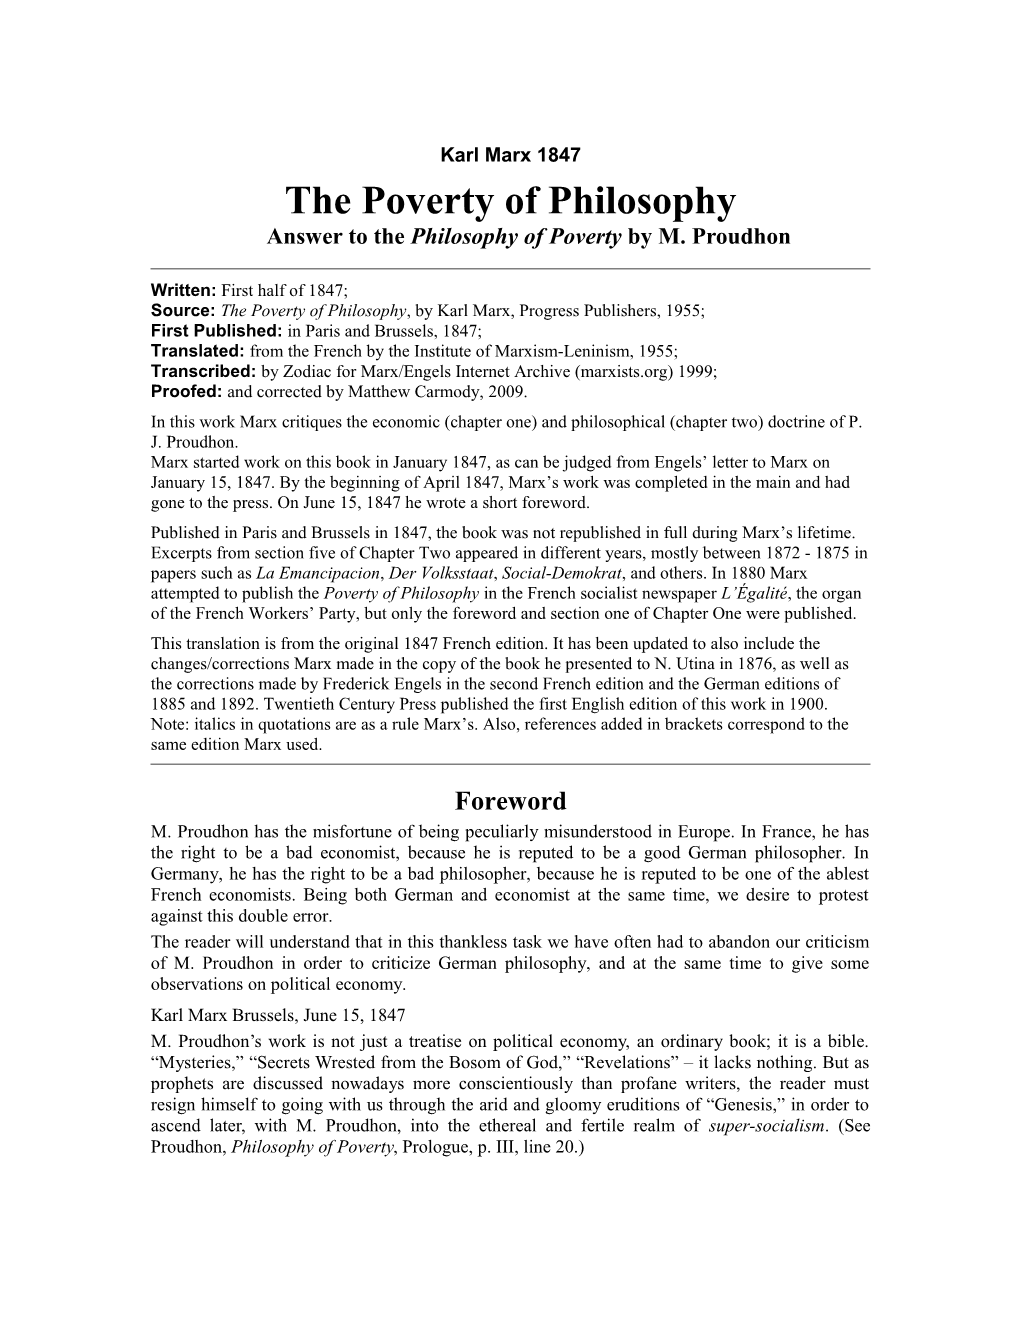 The Poverty of Philosophyanswer to the Philosophy of Povertyby M. Proudhon